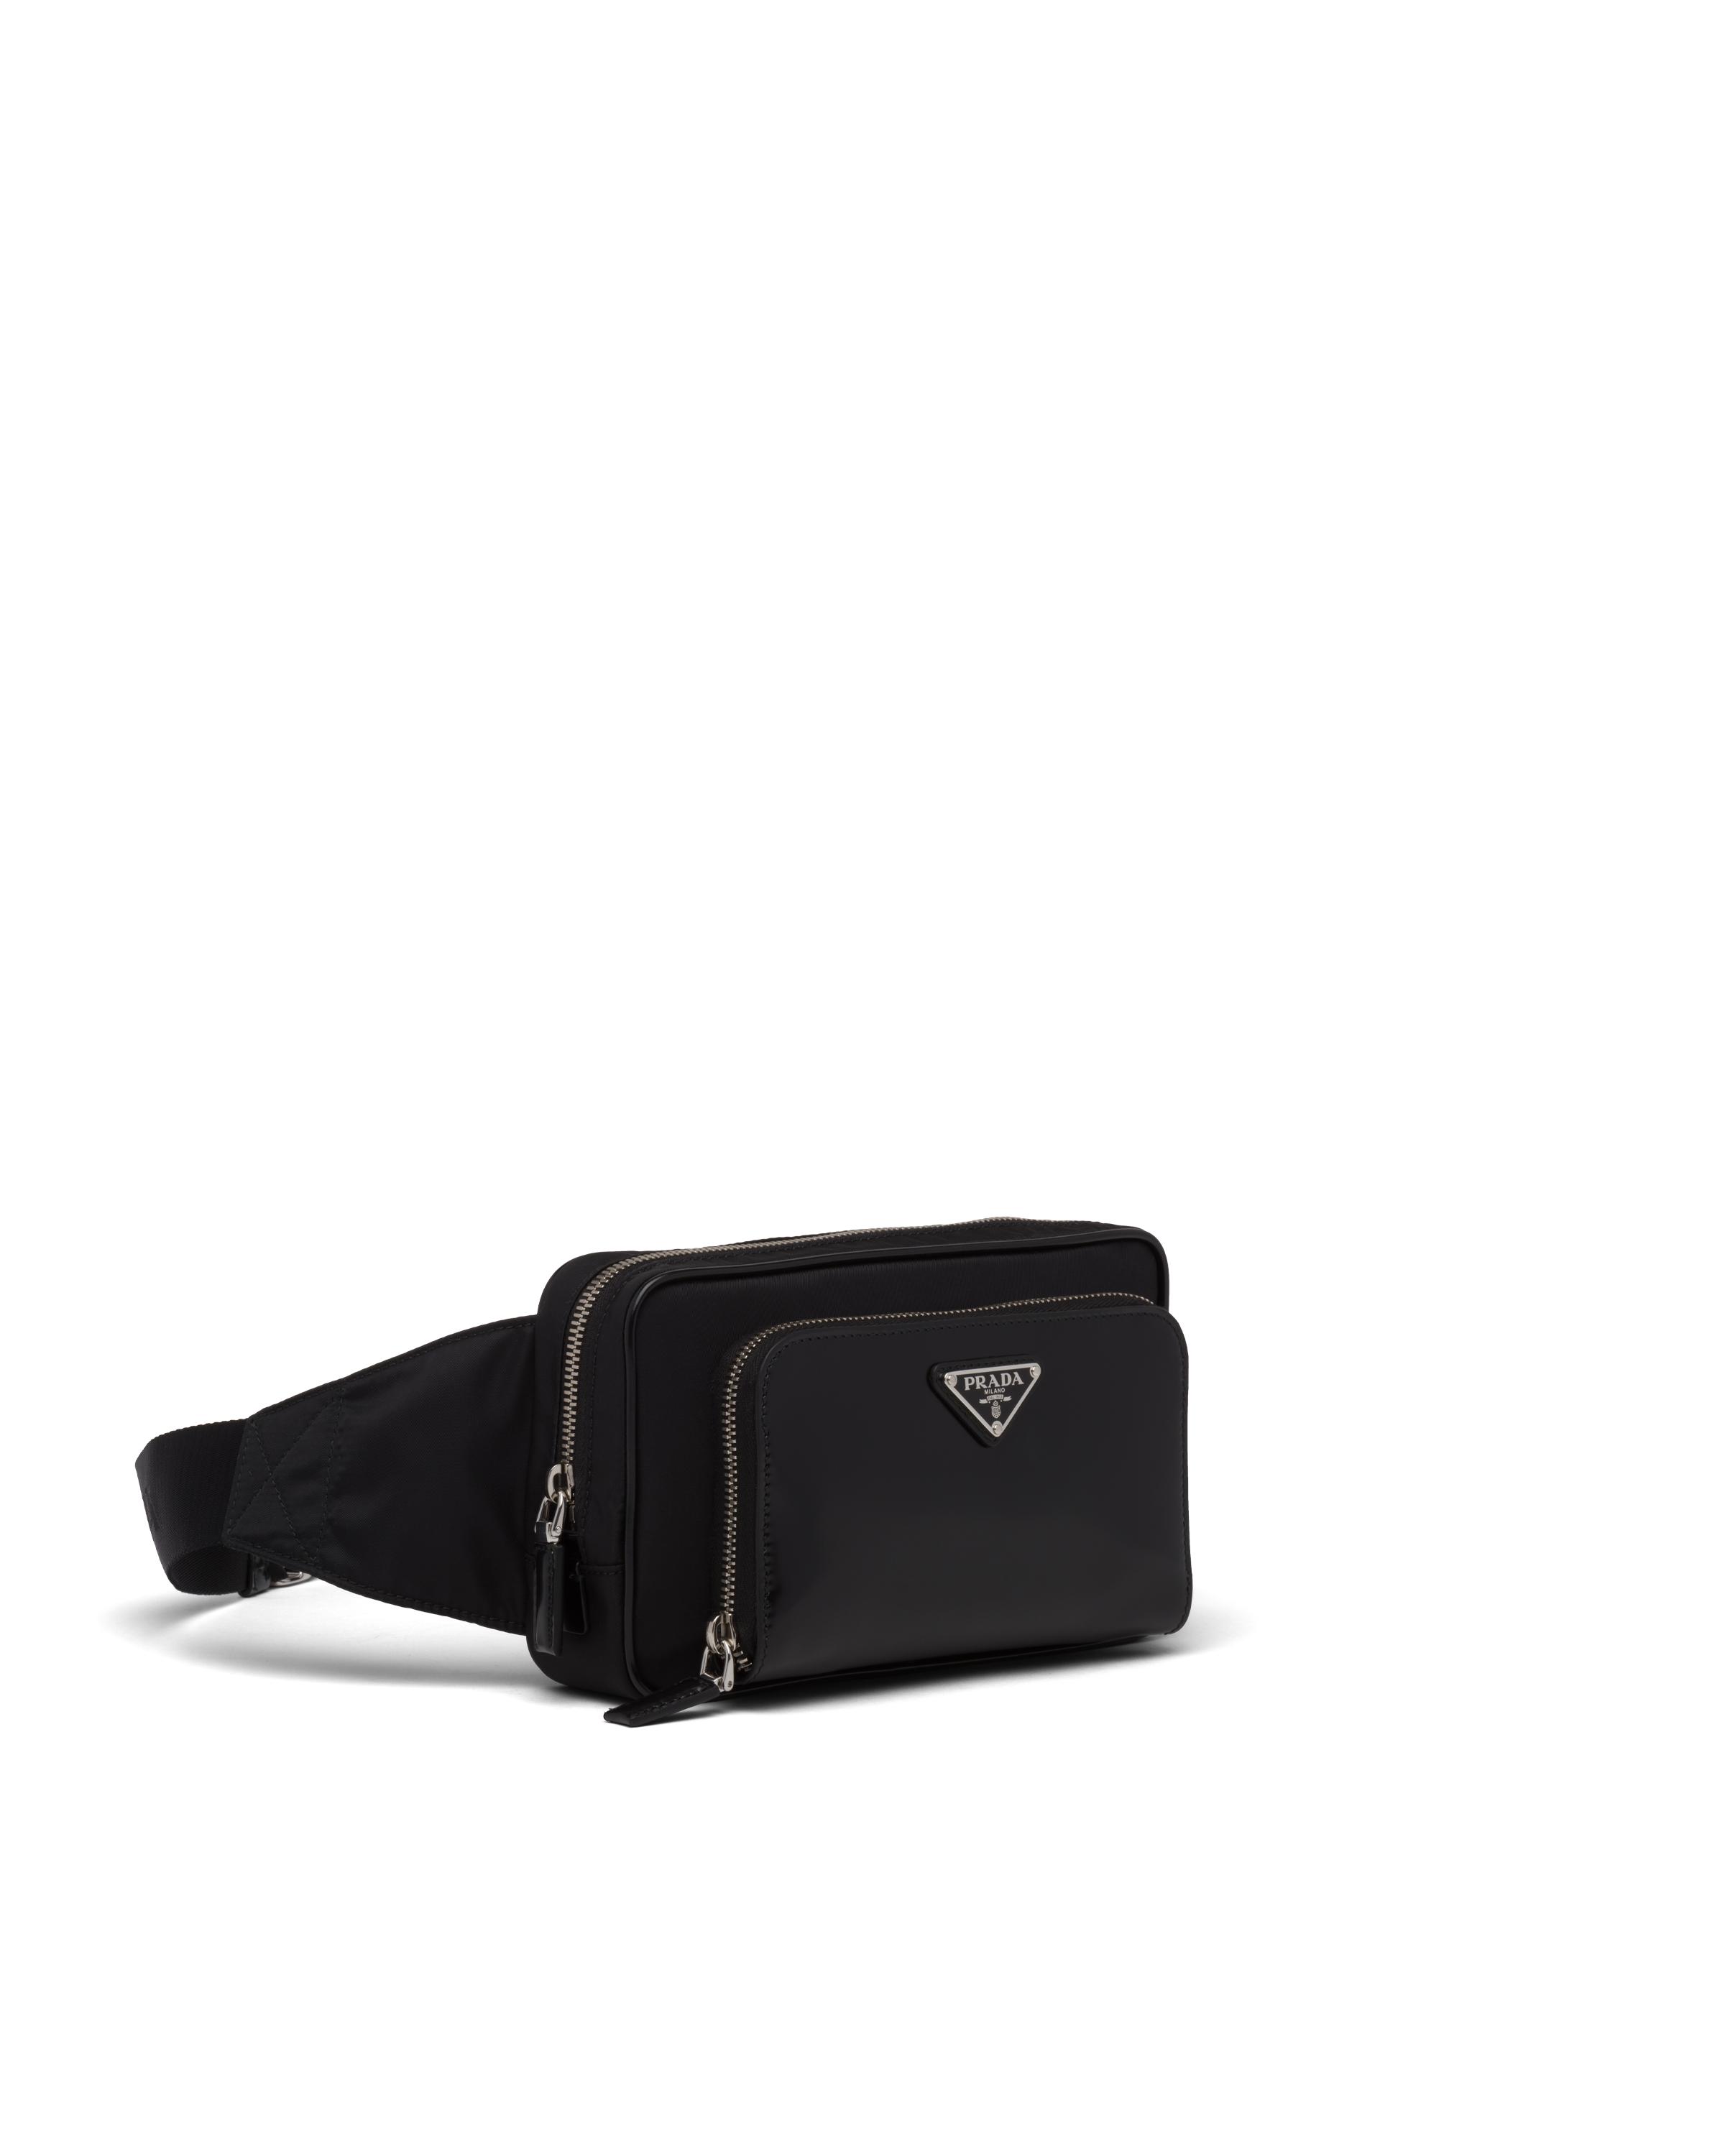 Prada Synthetic Re-nylon And Leather Belt Bag in Black for Men - Lyst